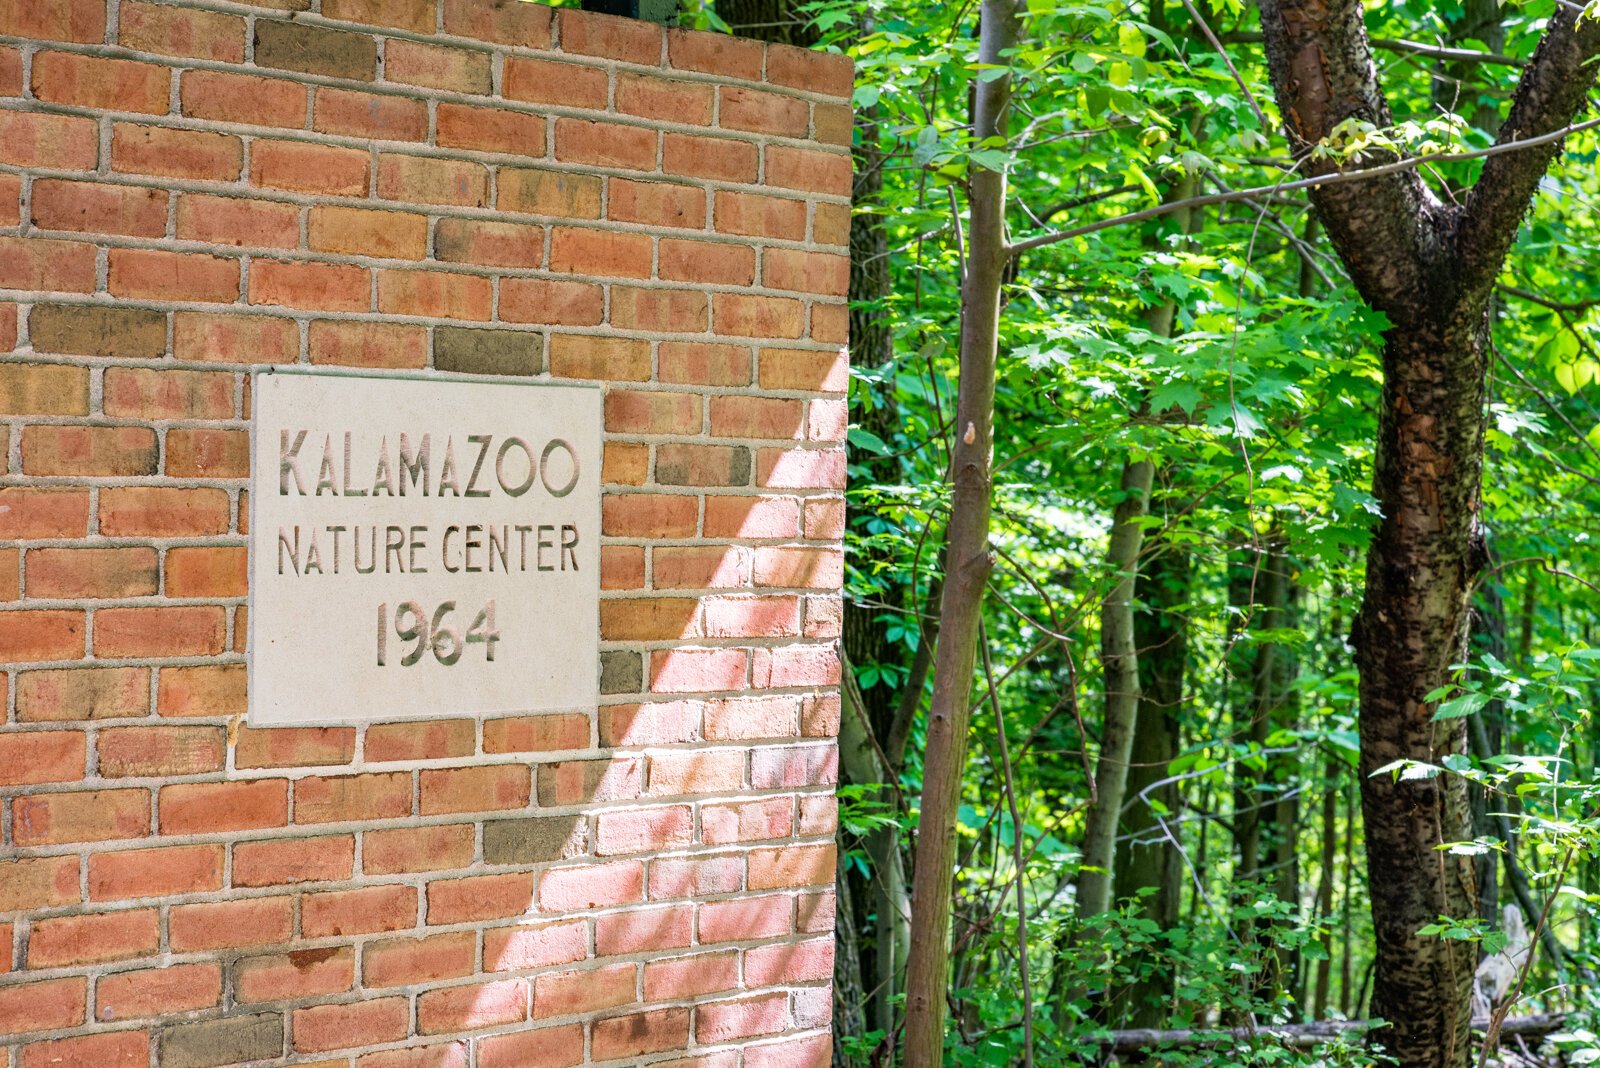 2023 Lyceum hosted at the Kalamazoo Nature Center, founded in 1964